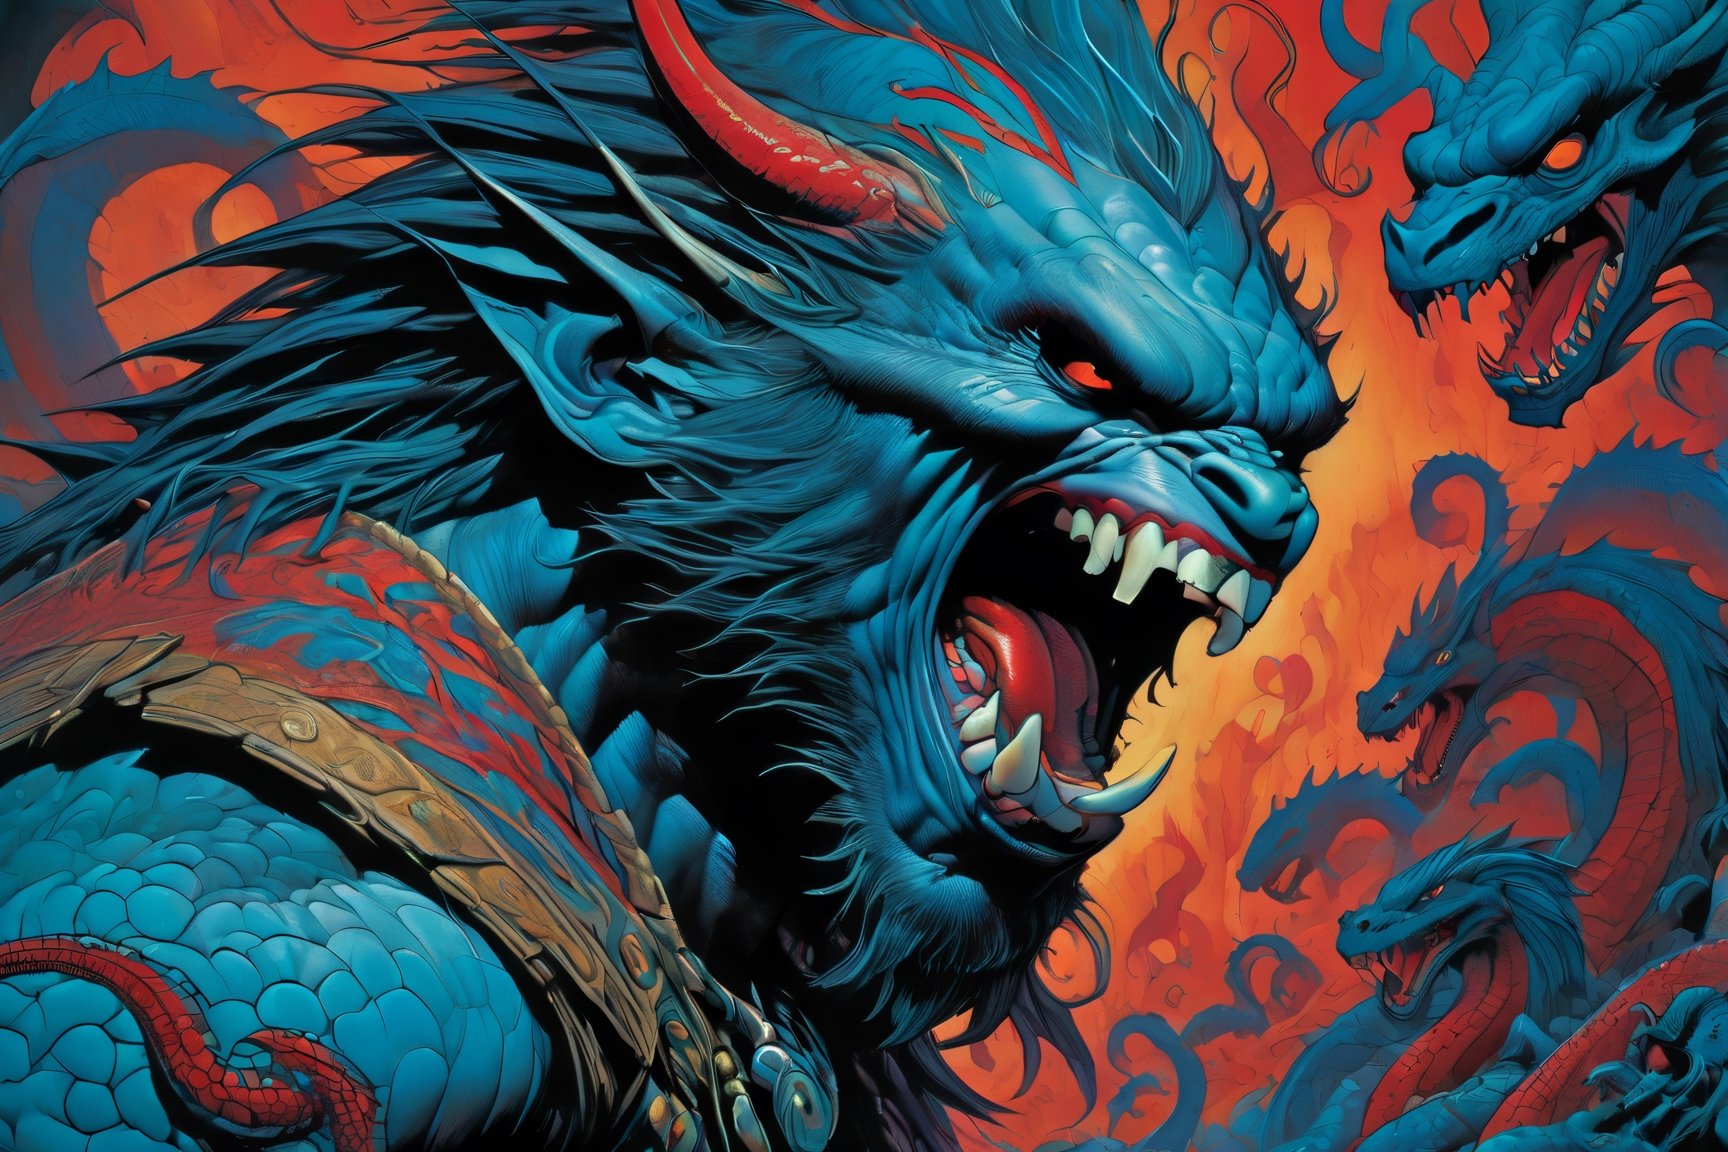 close up of the mans face, a sexy black african mans arm and shoulder, man is staring screaming at the viewer, raging, long hair, the arm and shoulder are covered in a very detailed intricate red and blue dragon tattoo that is protruding outfrom the skin, coming alive, its screaming, scratching, similar to dragon tattoo by Boris Vallejo, slowly you see the small dragon tattoo in parts is coming out of the skin and becoming a real version of the tattoo, sticking out, scales, extended claws, spit, spittle, blood drops, 16K, movie still, cinematic, ,omatsuri,DonMn1ghtm4reXL,DonMWr41thXL ,potma style,monster,retropunk style,Starship,zj,oni style